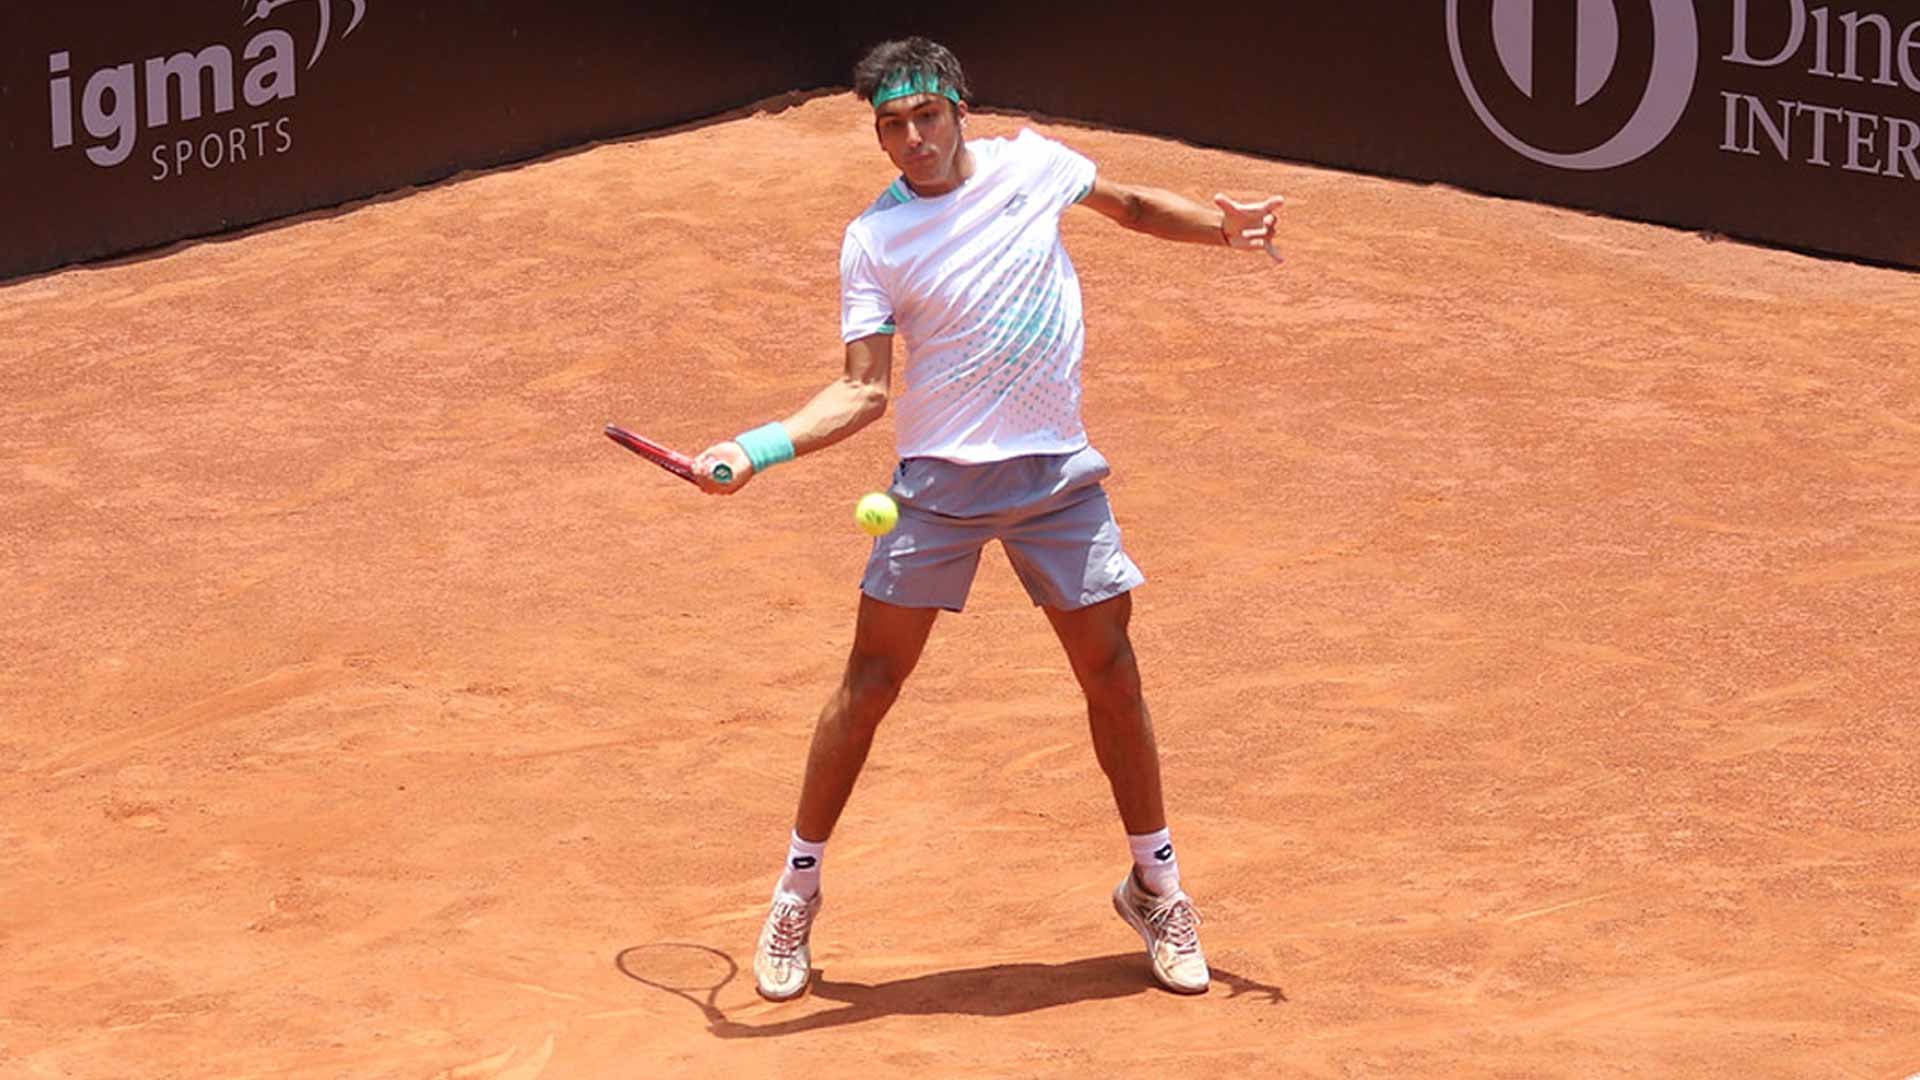 Roman Andres Burruchaga at the 2022 Lima Challenger, where he reached the semi-finals.